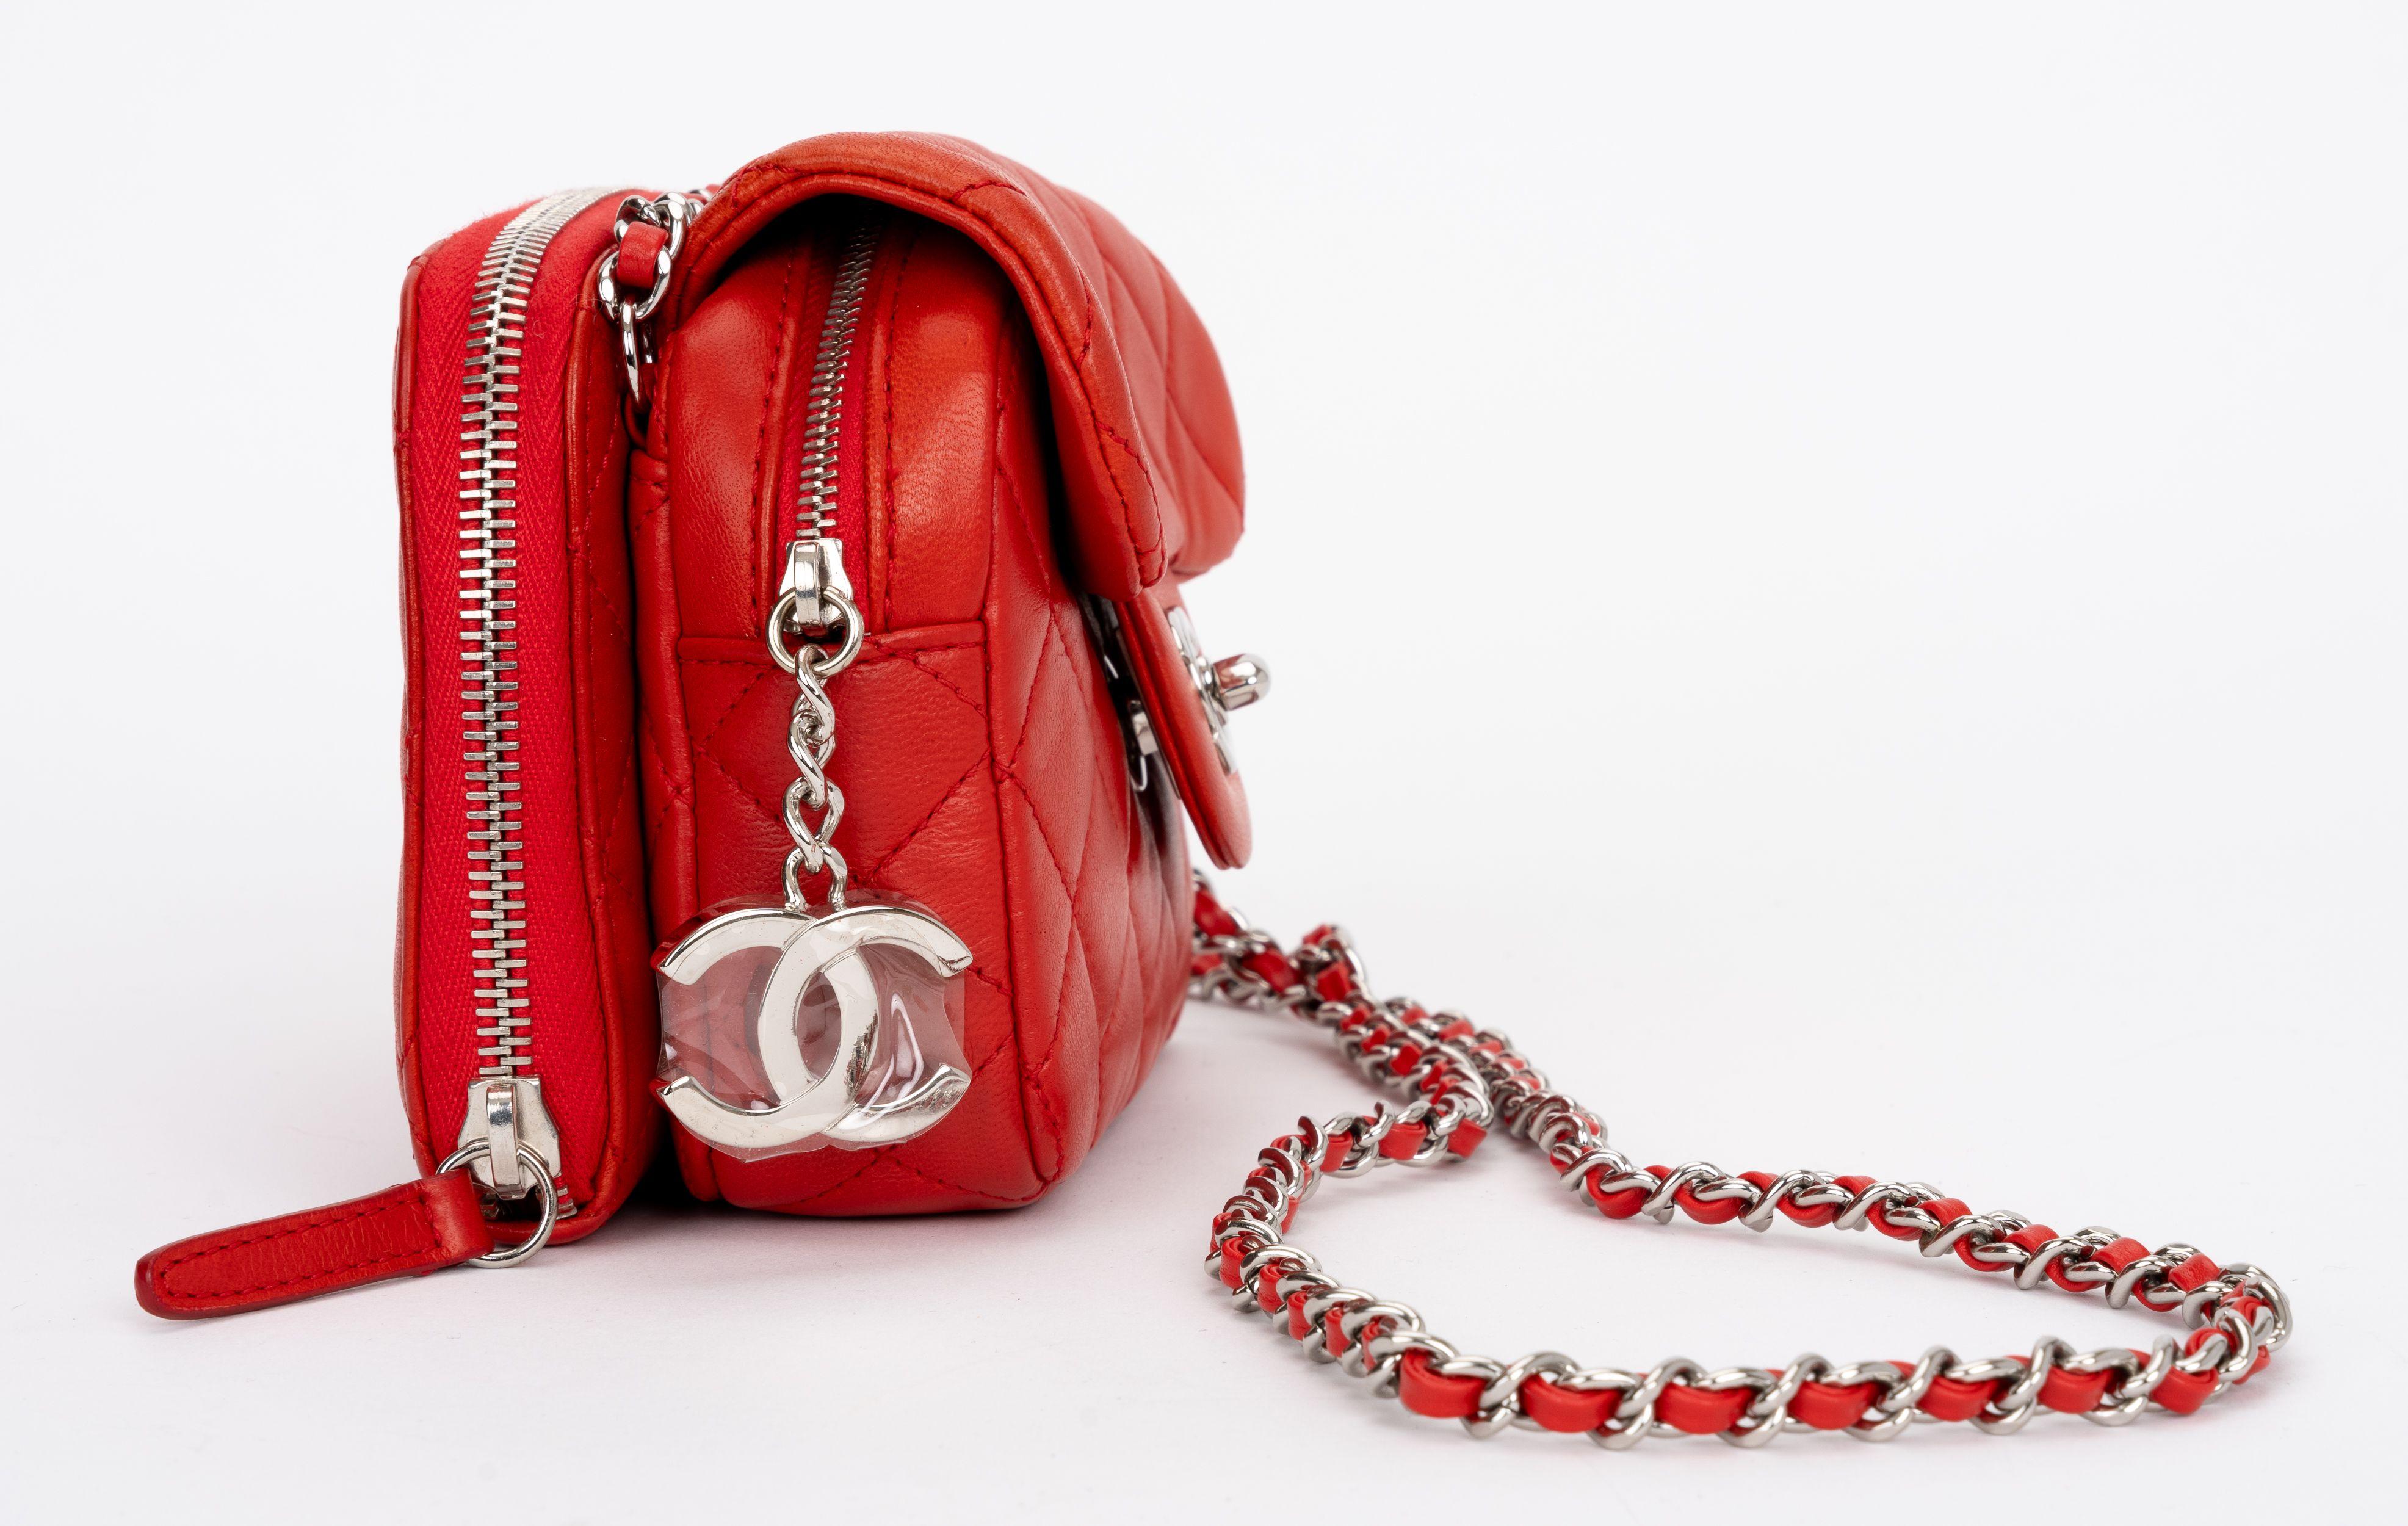 Chanel Red Leather Crossbody Flap Bag In Excellent Condition For Sale In West Hollywood, CA